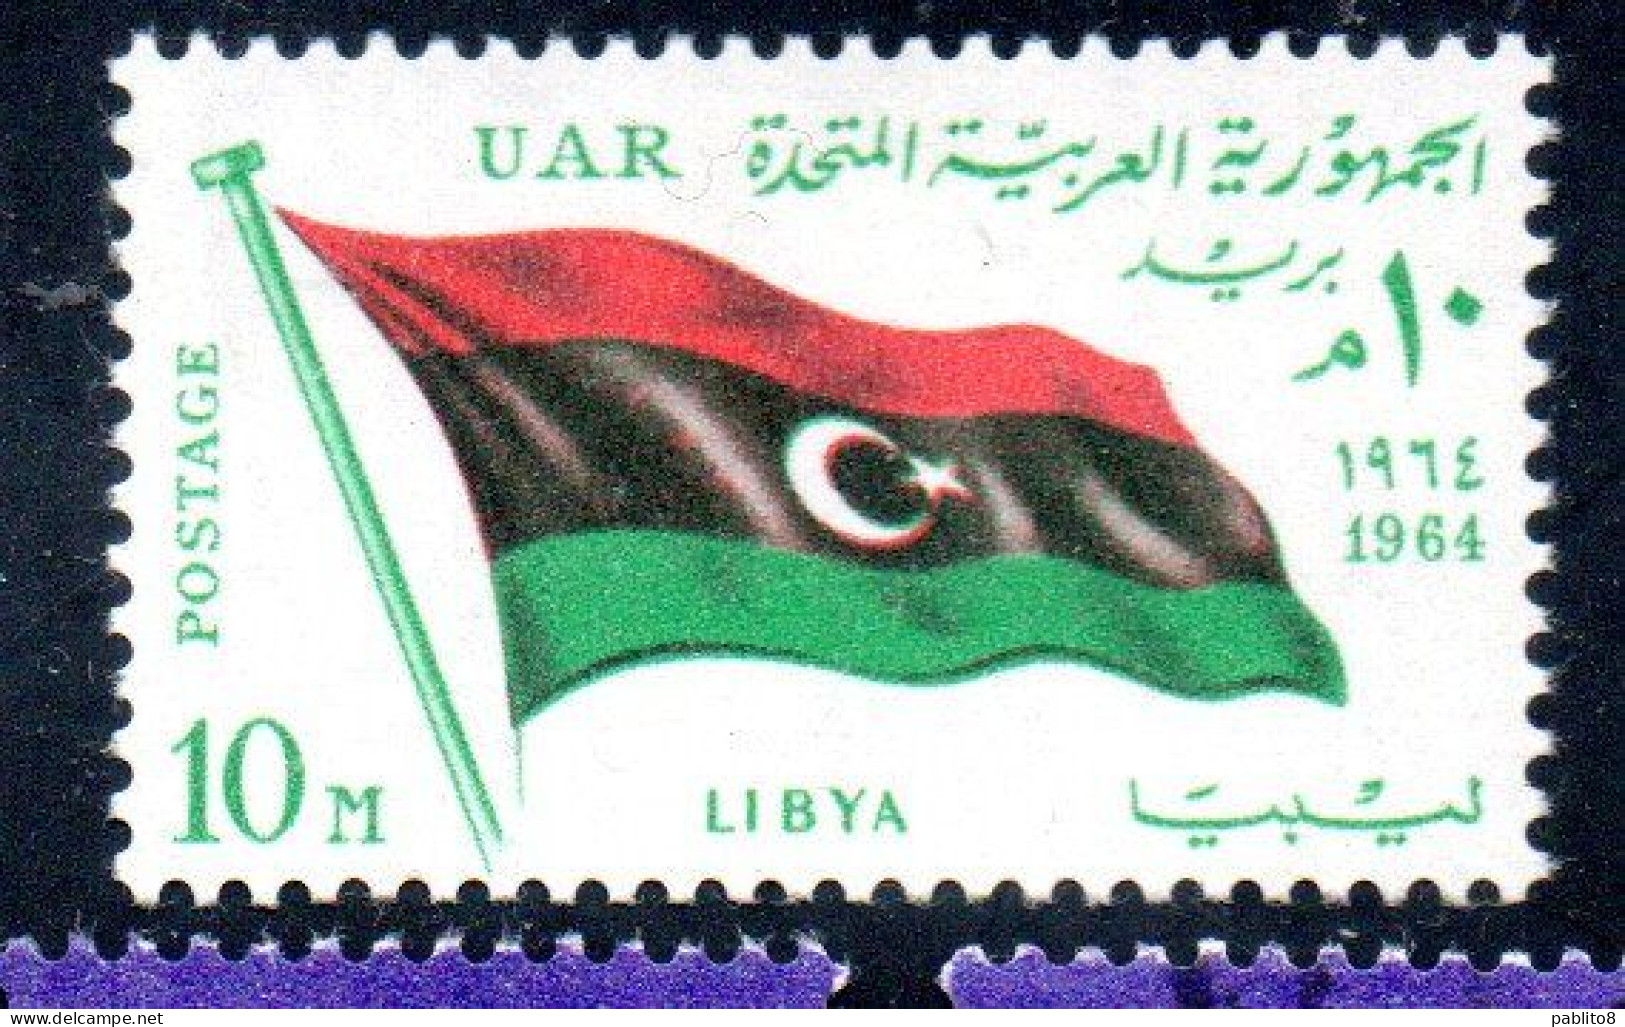 UAR EGYPT EGITTO 1964 SECOND MEETING OF HEADS STATE ARAB LEAGUE FLAG OF LIBYA 10m  MH - Unused Stamps